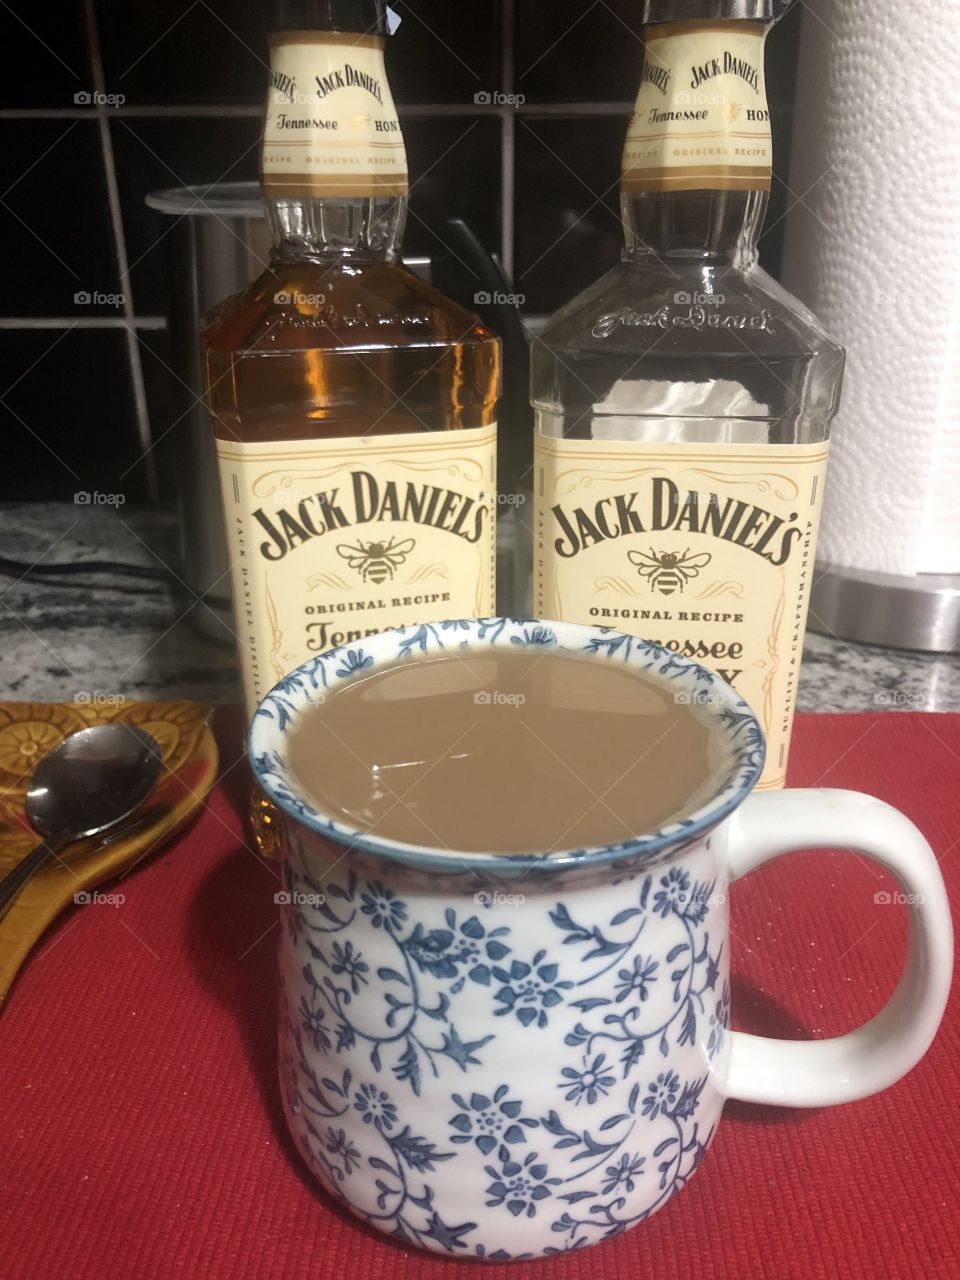 My Version of a Hot Toddy. Café Bustelo with a Shot of Jack Daniel’s Tennessee Honey Whiskey. No Sugar Required.